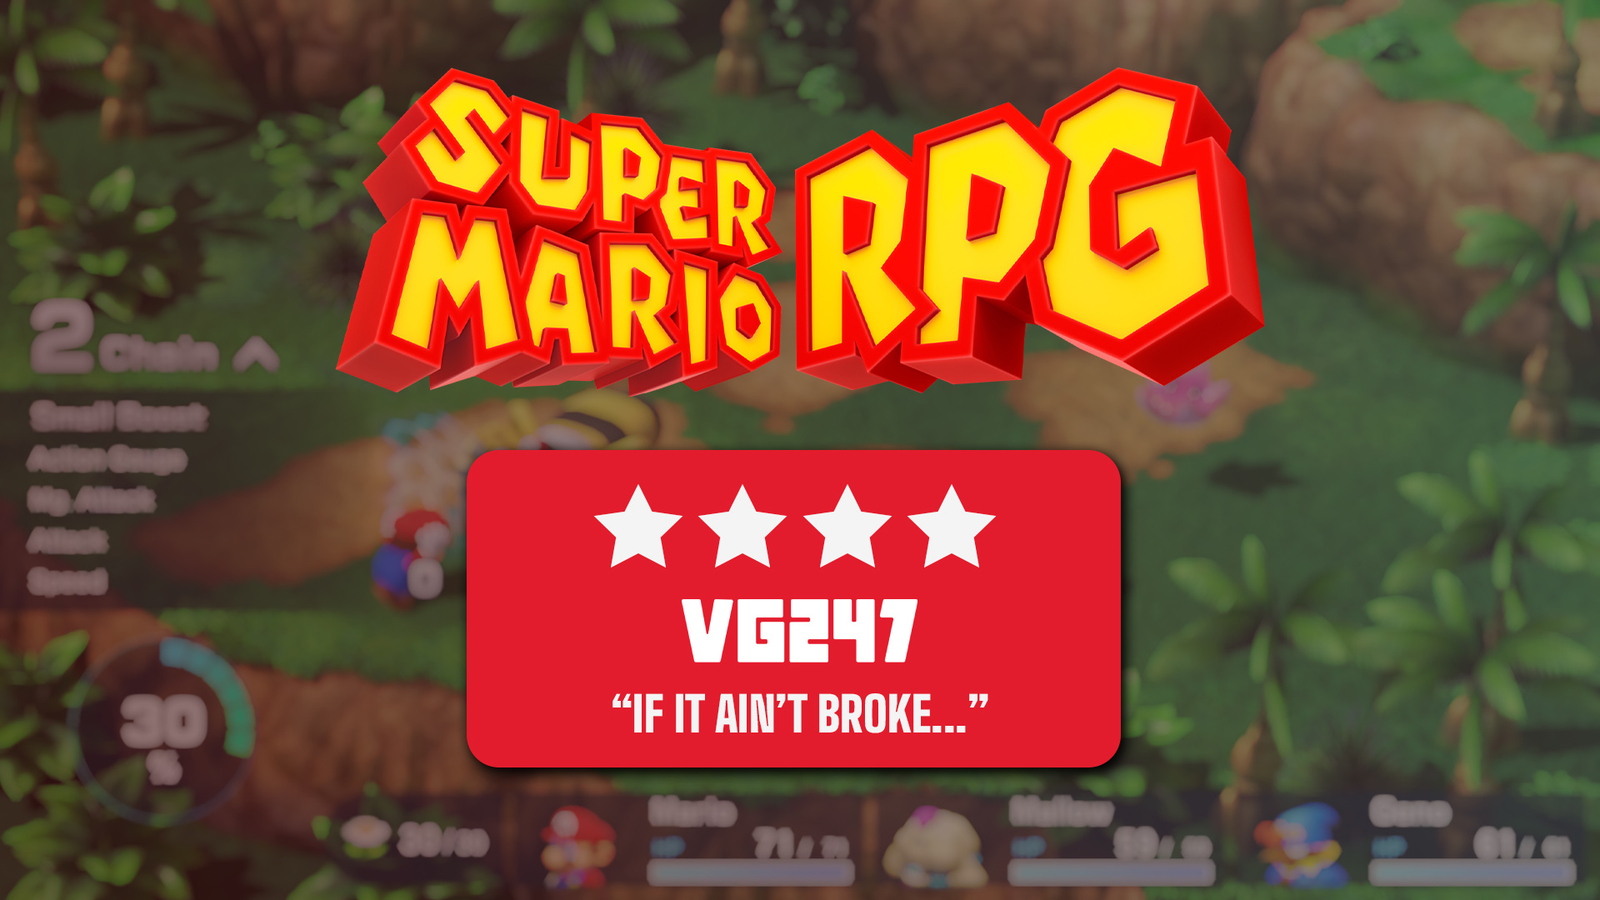 Mario RPG feels like a Switch classic made in 1996